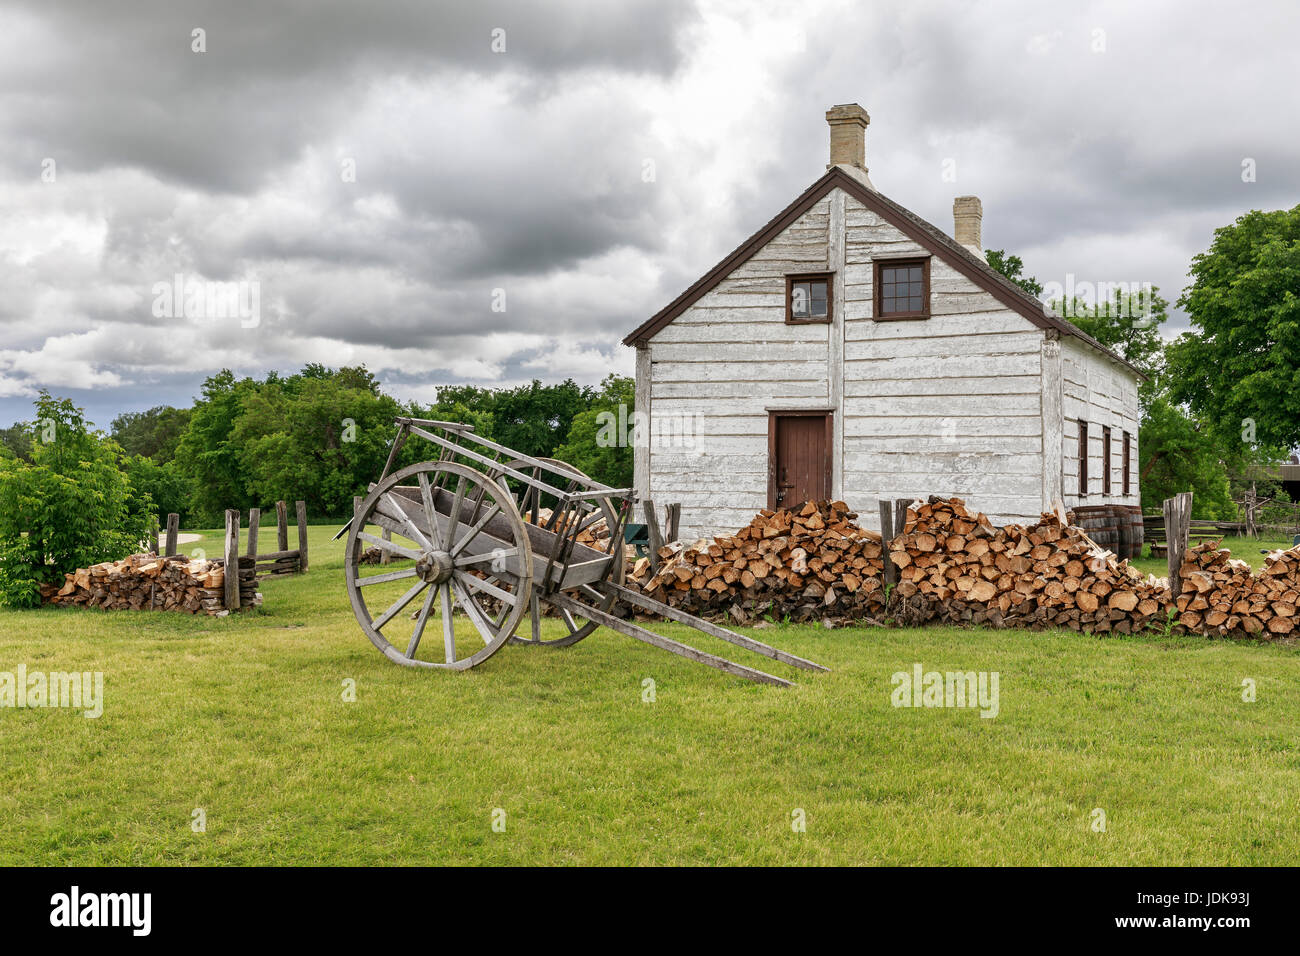 Lower Fort Garry National Historic Site, Manitoba, Canada. Stock Photo